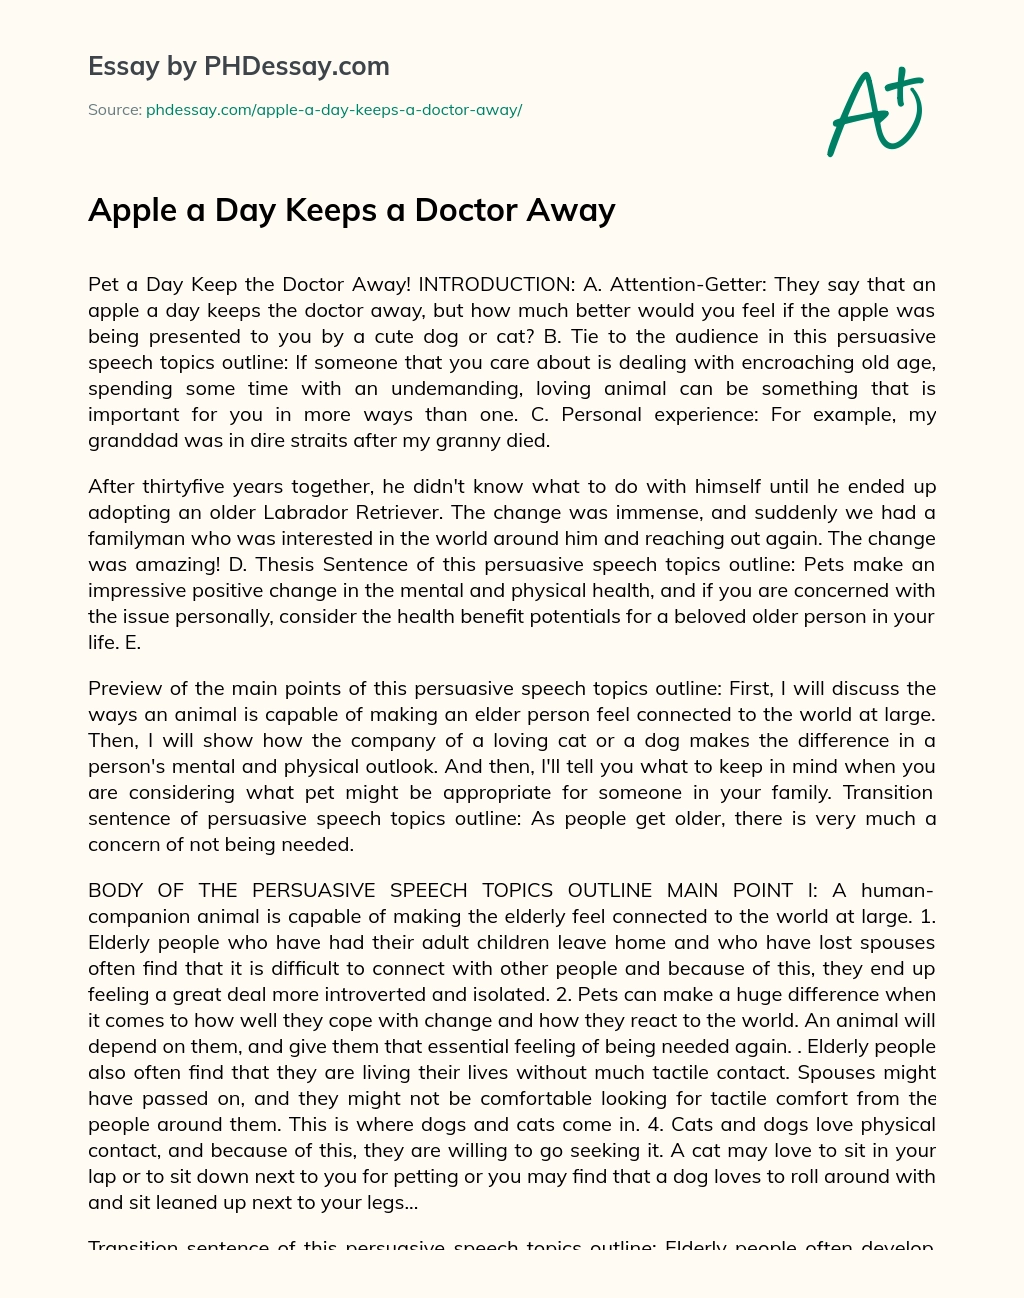 Apple a Day Keeps a Doctor Away essay